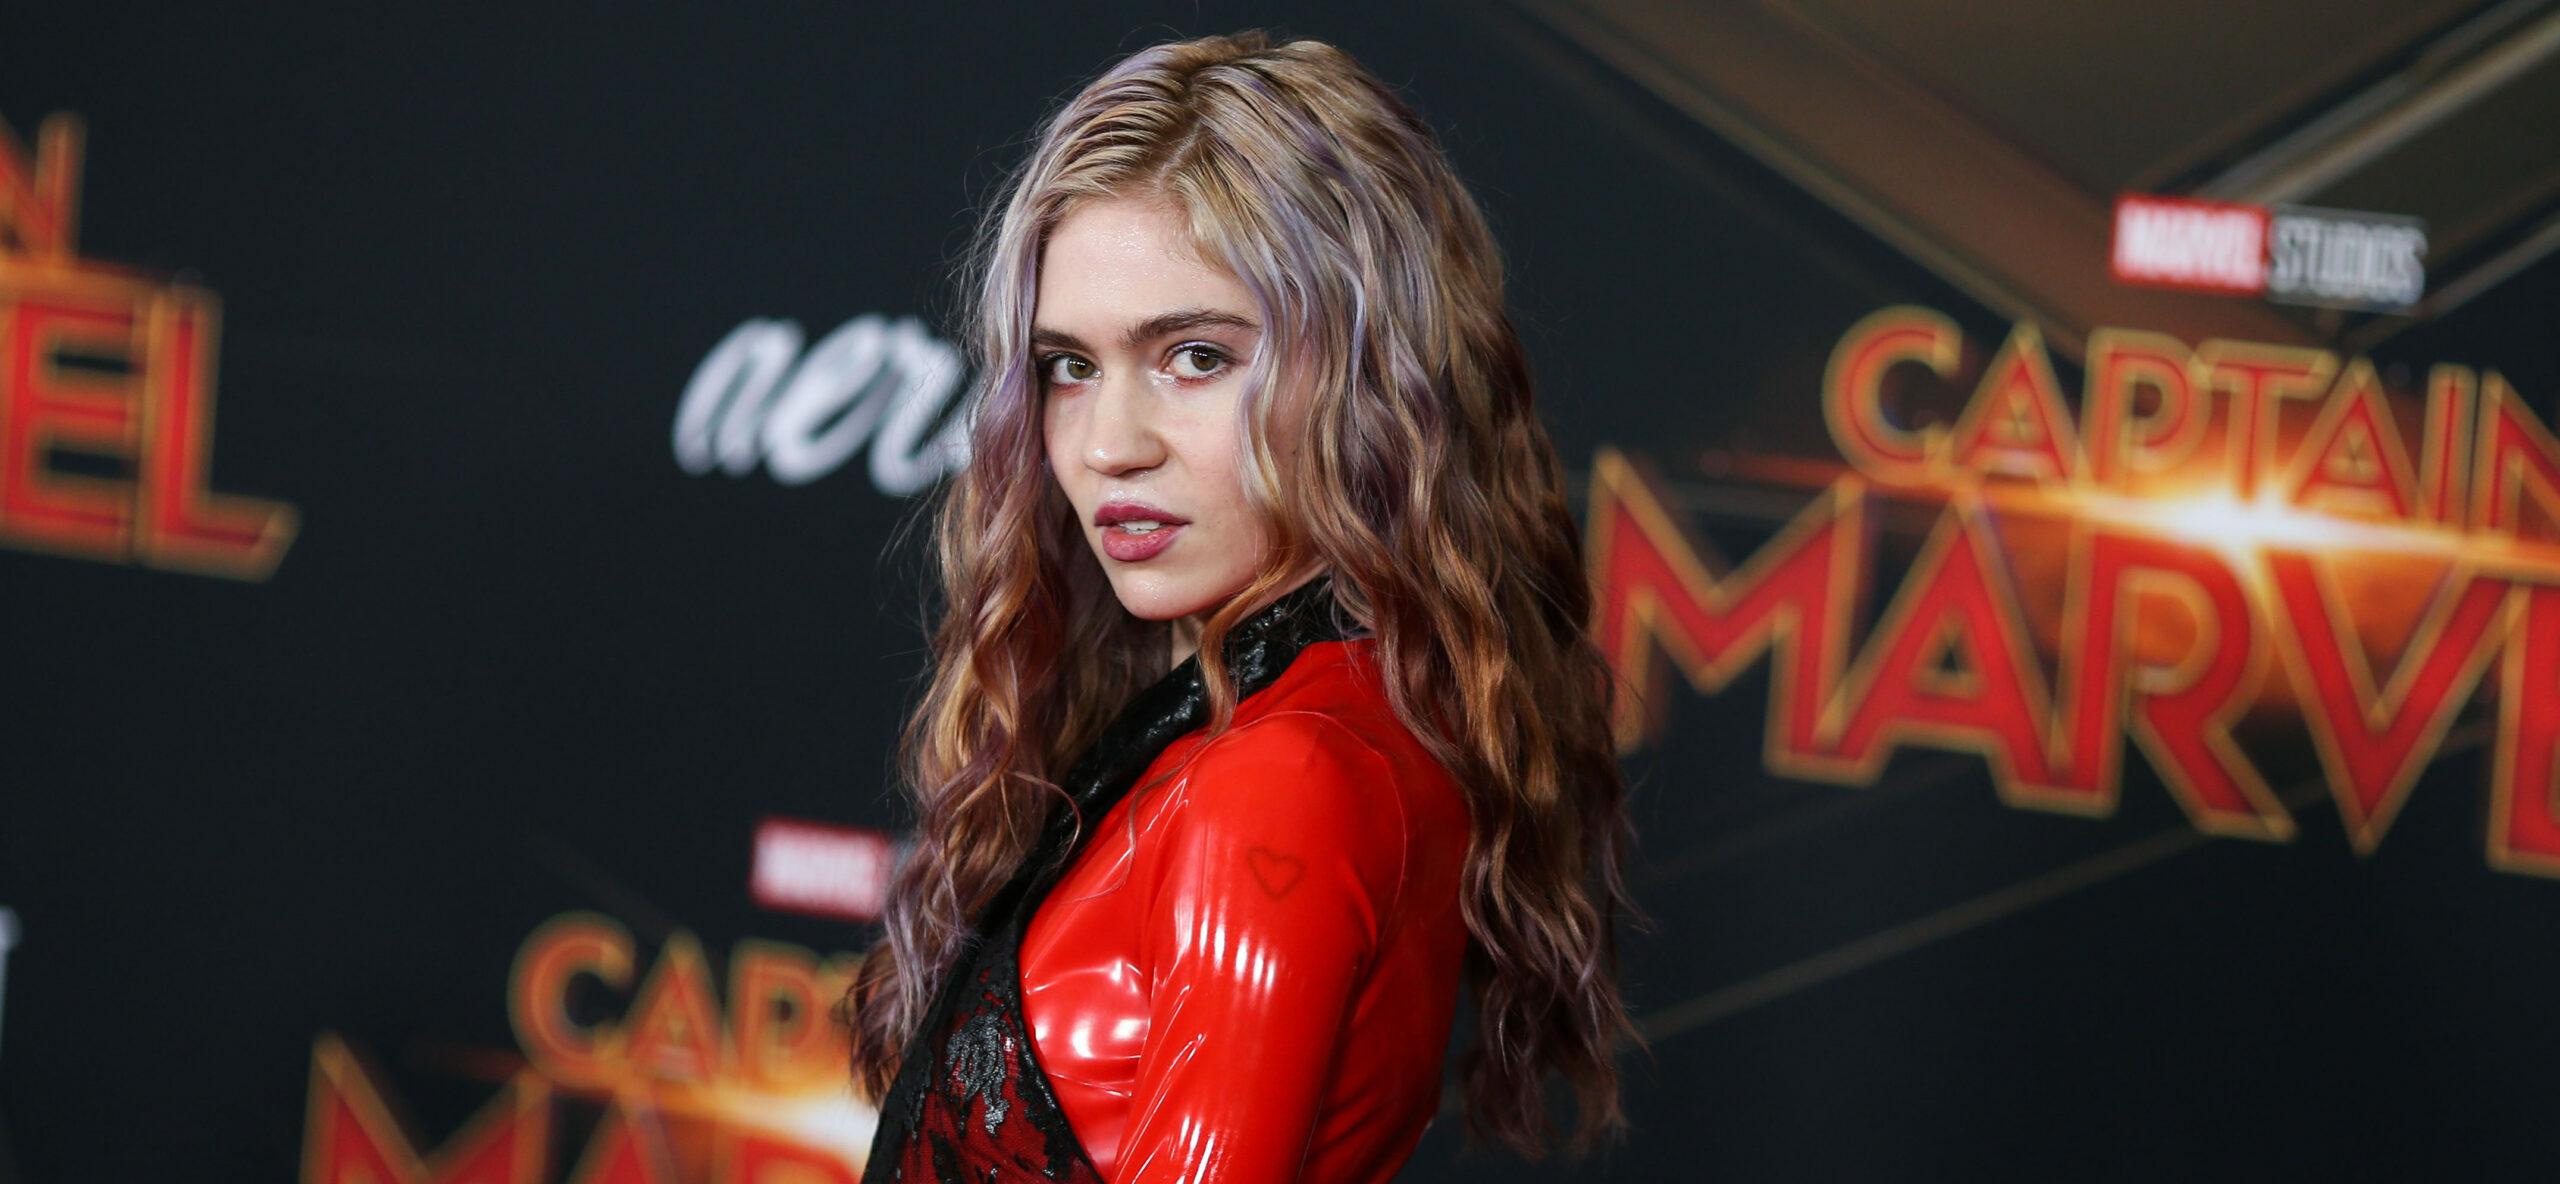 Grimes Shows Off ‘Alien Scar’ Tattoos As She Promotes Her New Song